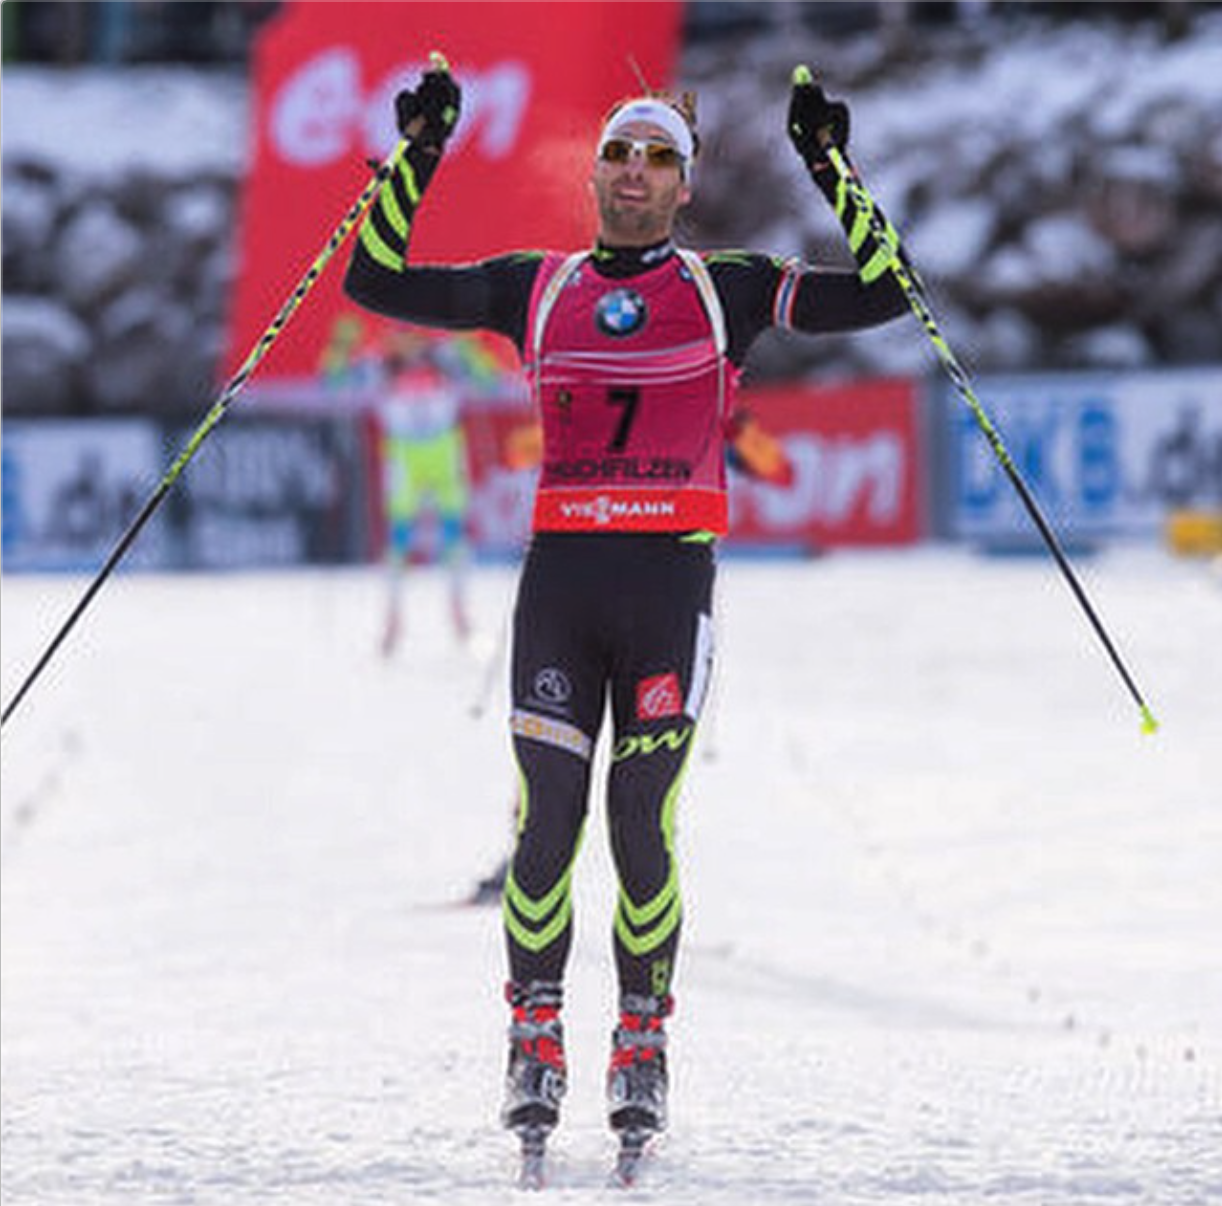 At it again: France's Martin Fourcade, here winning the 12.5 k pursuit in Hochfilzen, Austria, before Christmas, won the 10 k sprint in Oberhof, Germany today. (Photo: Martin Fourcade/Instagram)